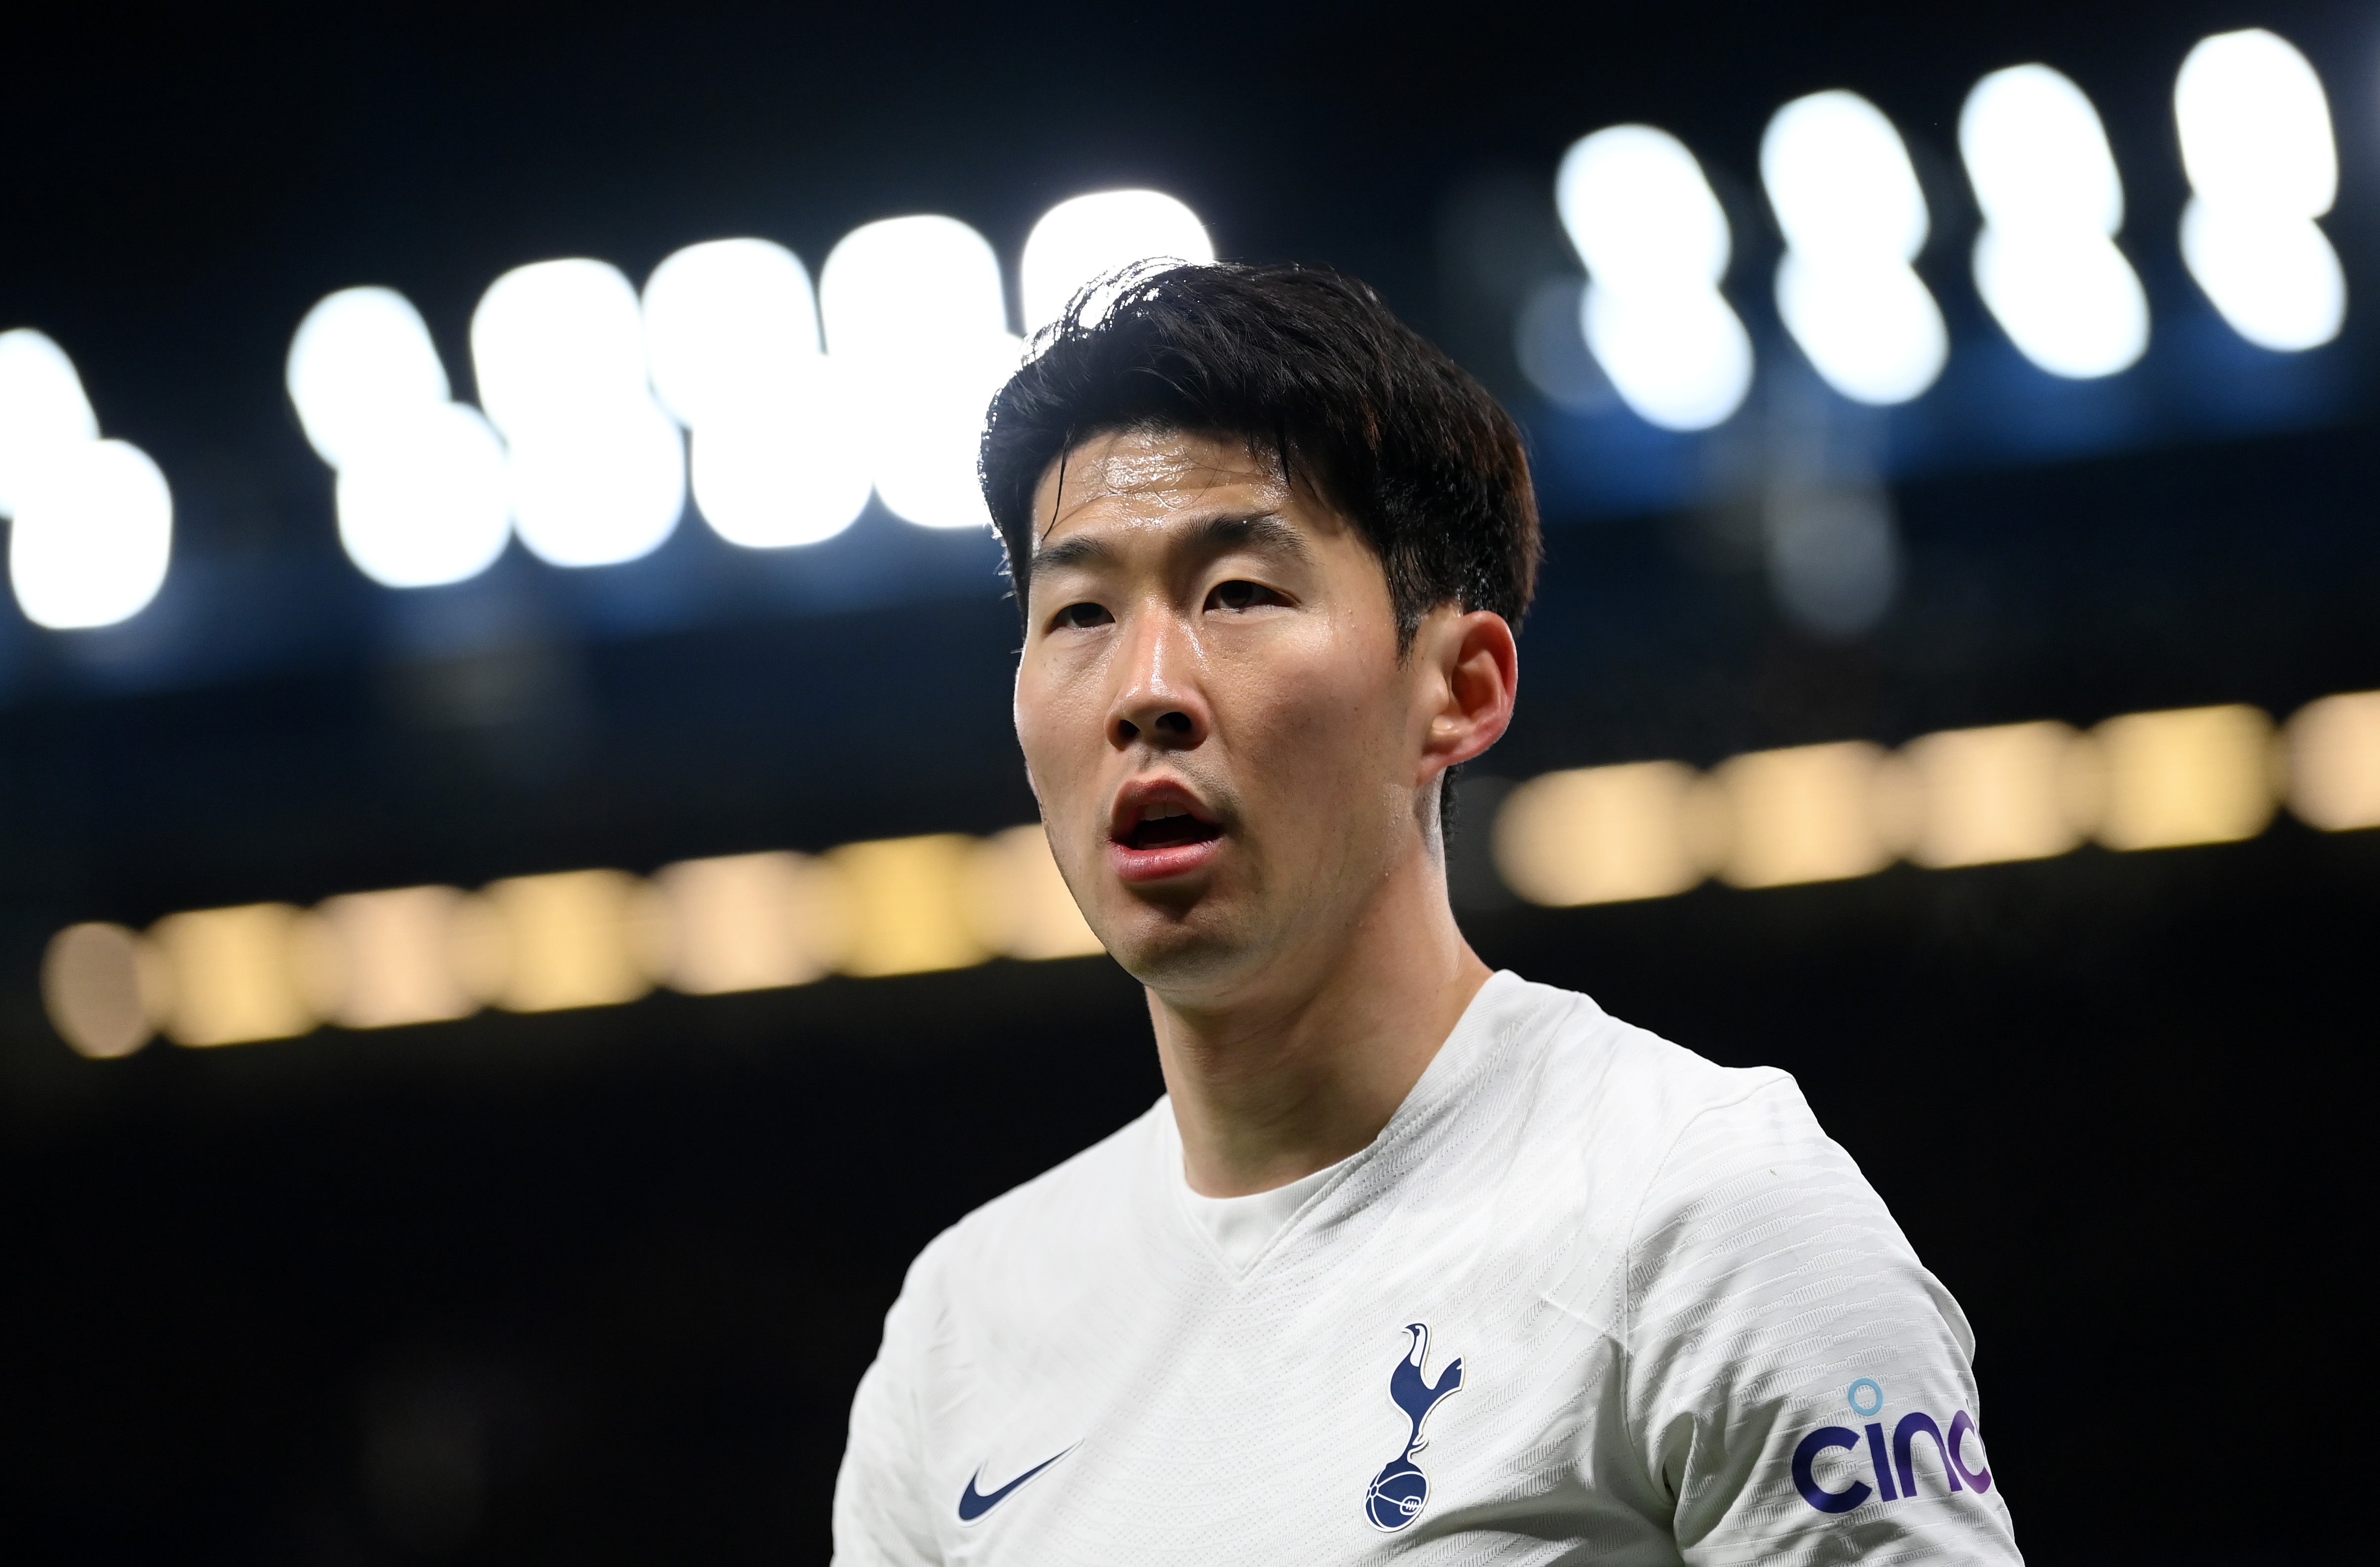 Son Heung-min, captain of South Korea and the ‘best footballer in Asia’, went to Spurs in 2015